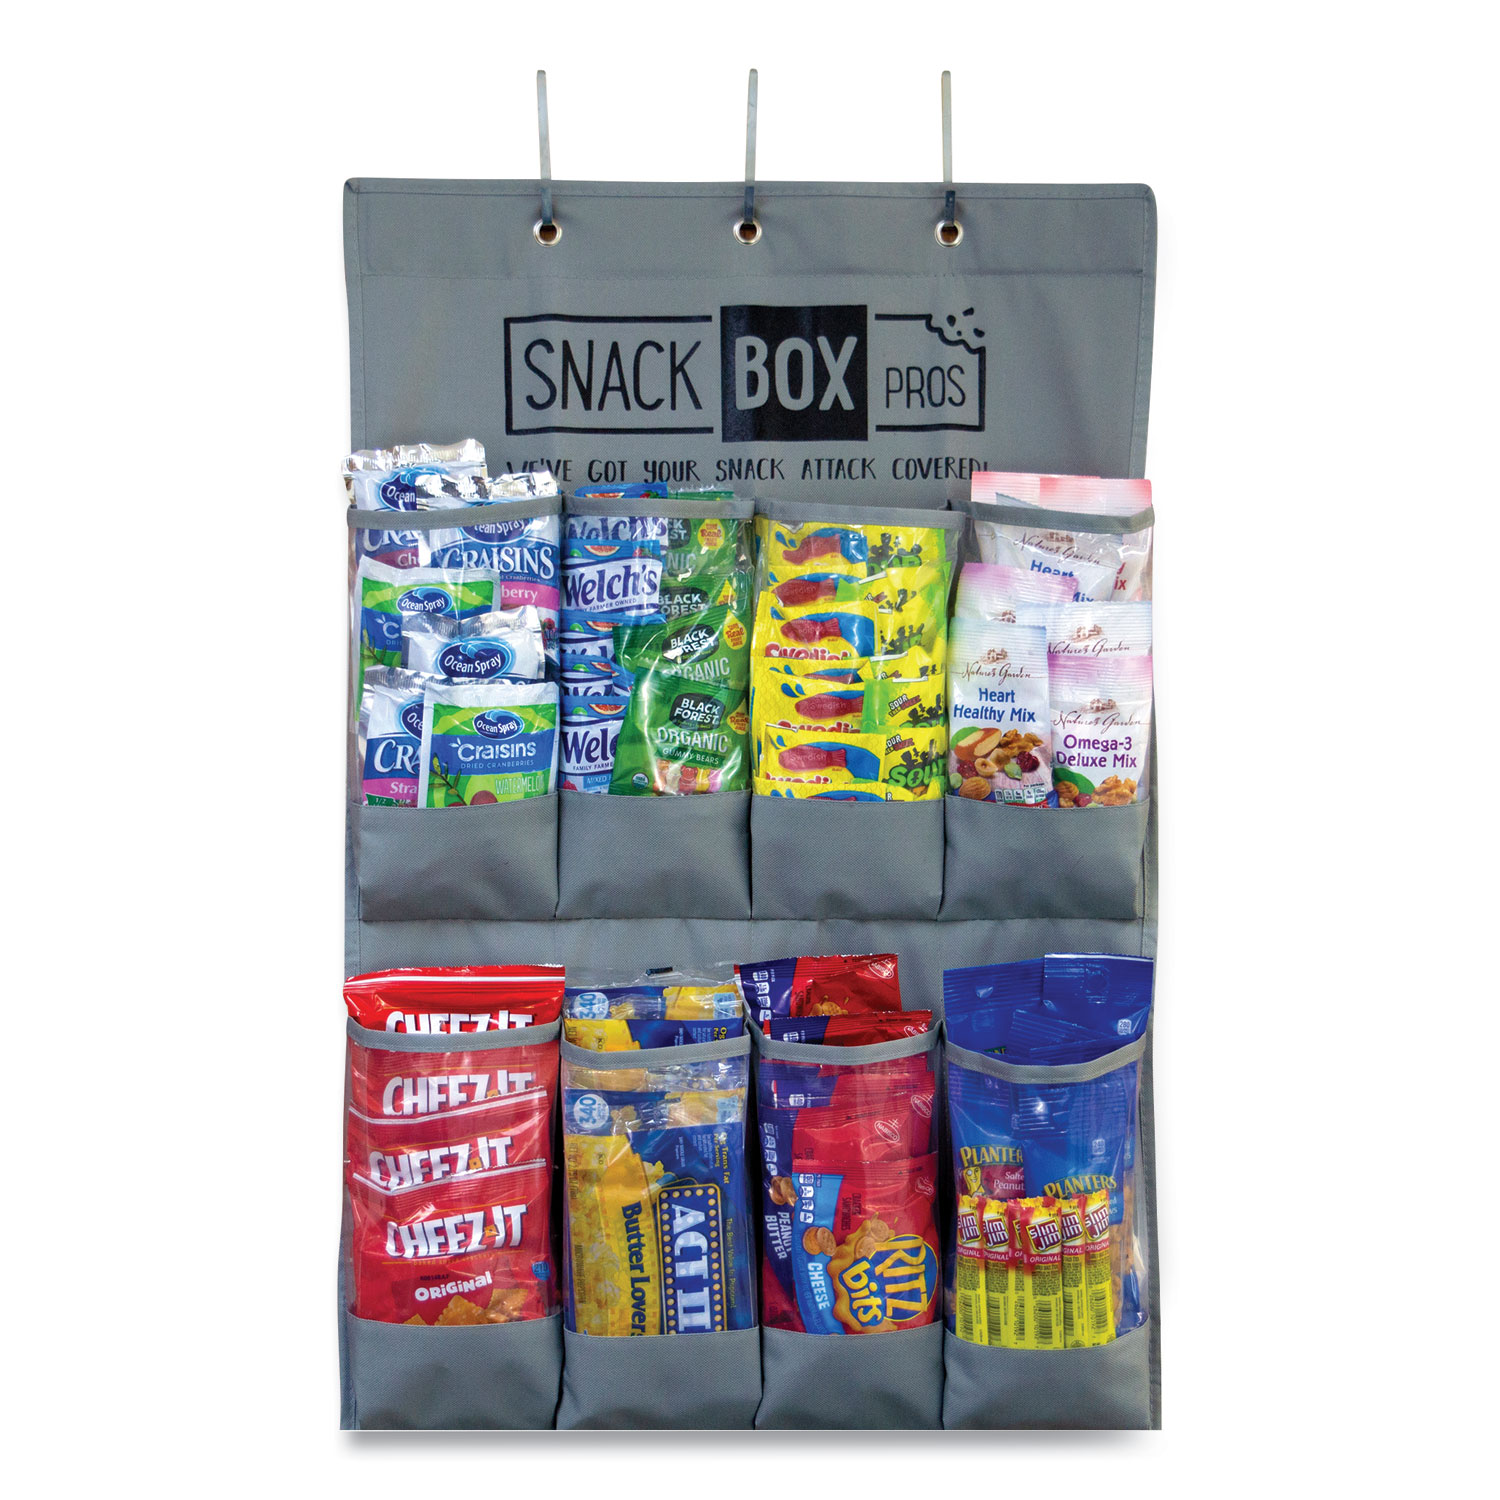  Snack Box Pros 70000045 Breakroom Healthy Snacks Over The Door Organizer, 20 Compartments, 12 x 12 x 20, Gray, Free Delivery in 1-4 Business Days (GRR70000045) 